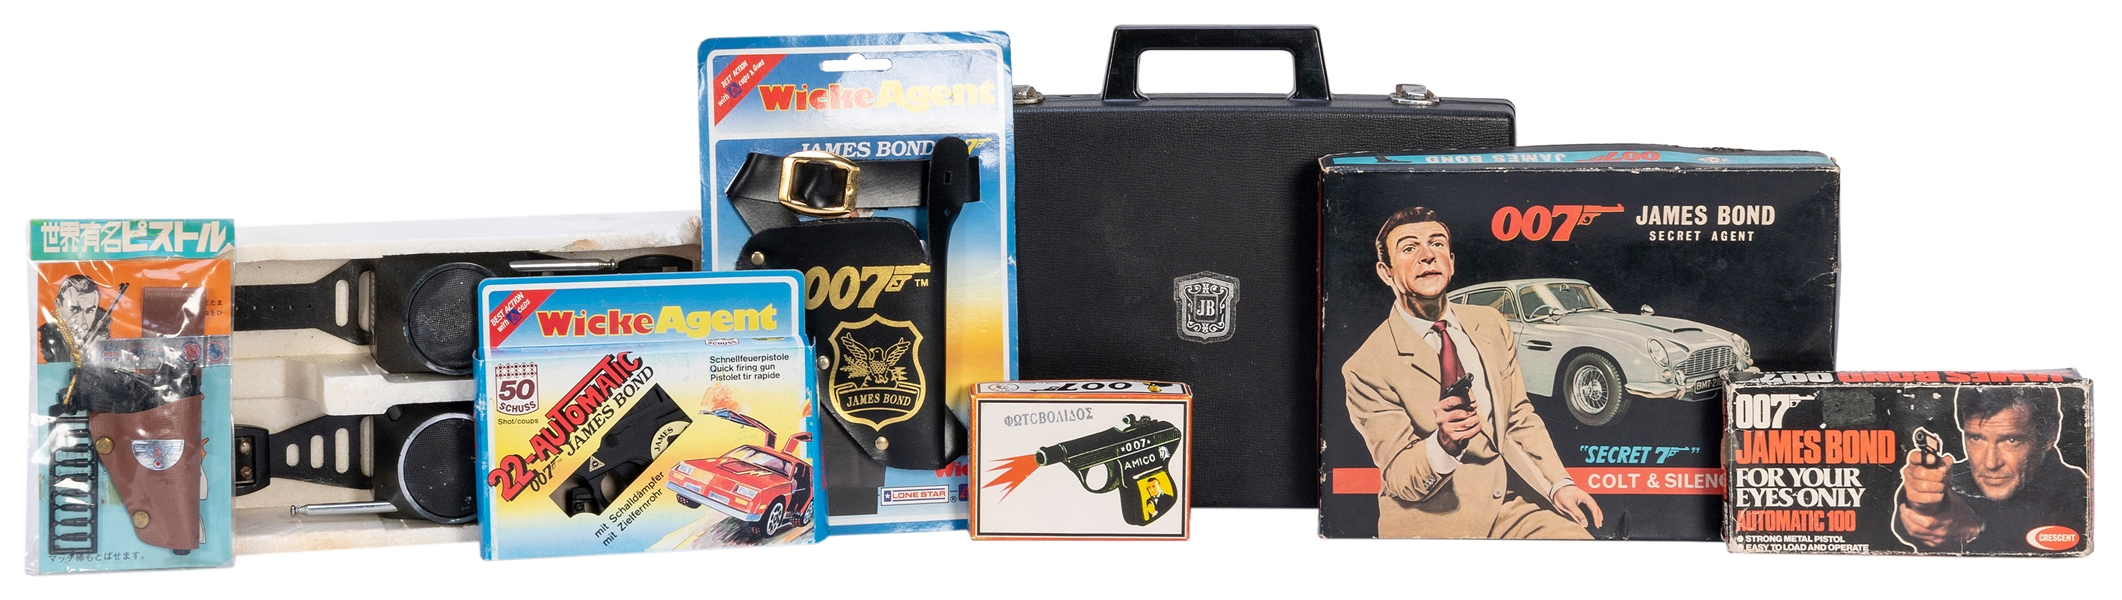  James Bond Group of Vintage Spy Gun Toys and Accessories. E...